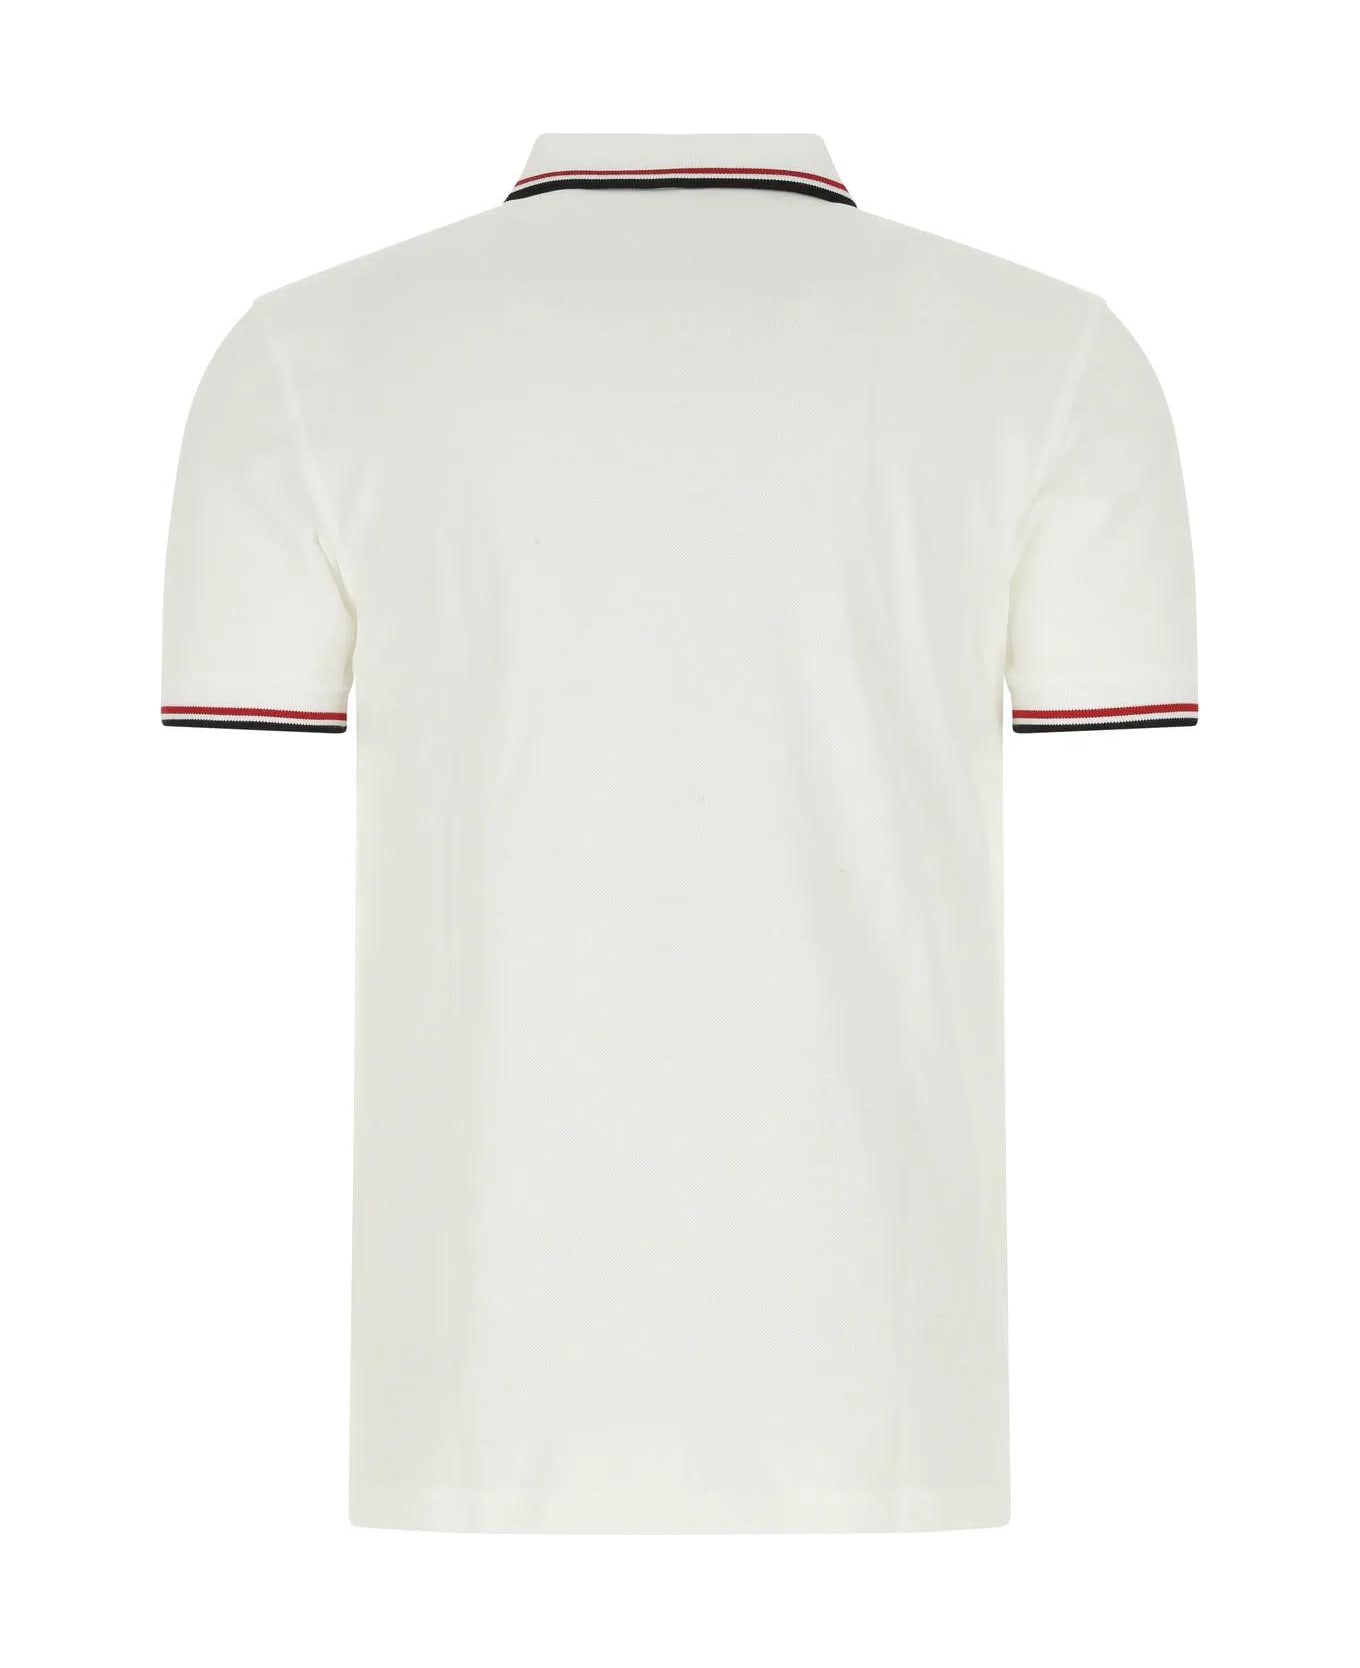 Fred Perry White Piquet Polo Shirt - Wht/brt Red/nvy